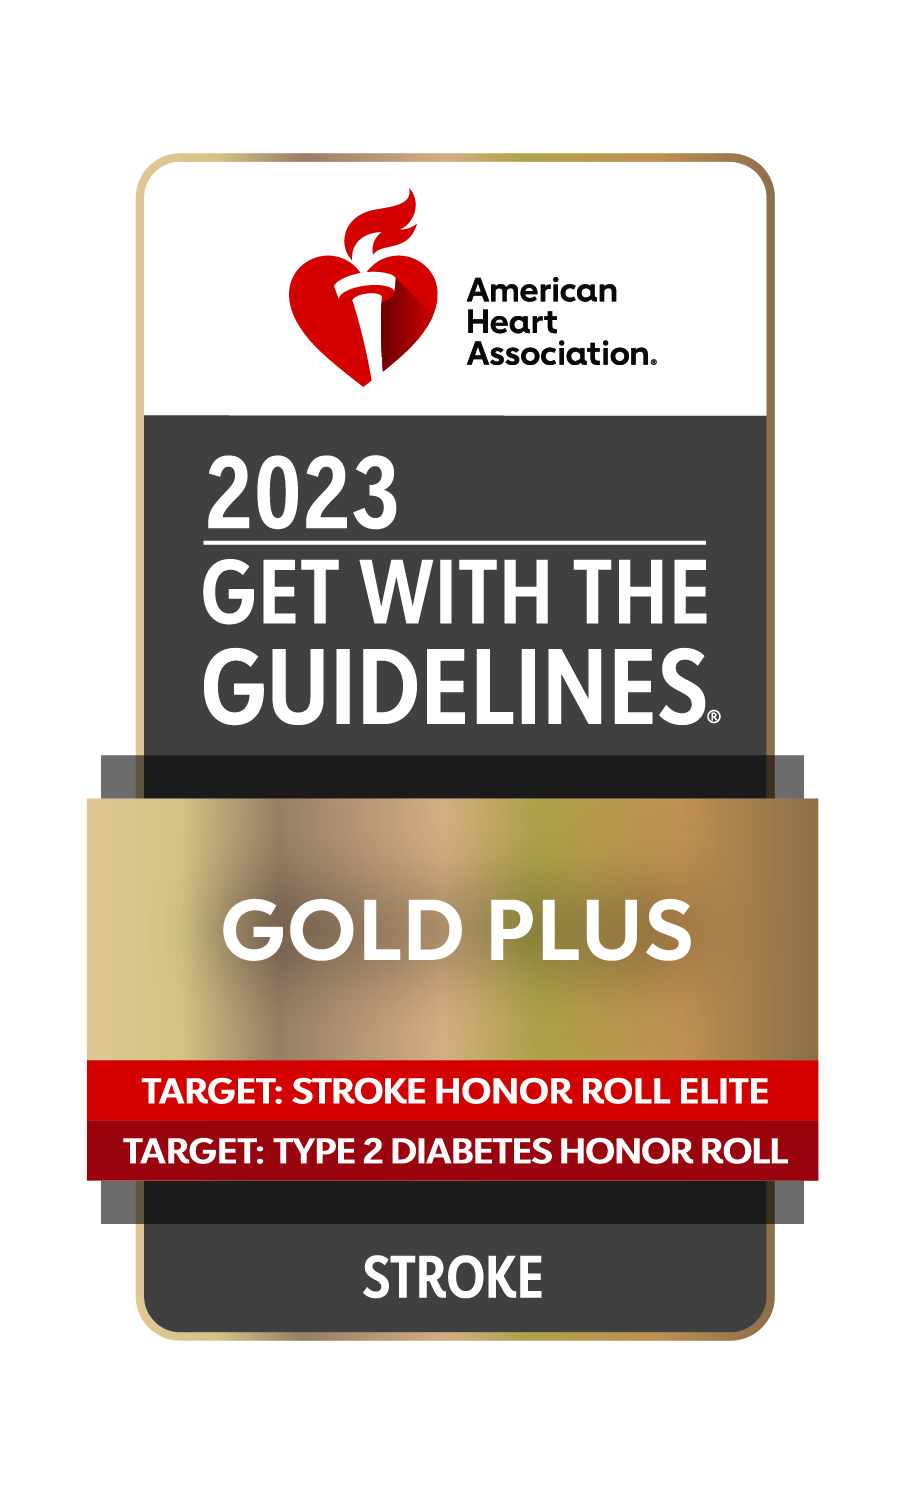 American Heart Association 2023 Get With the Guidelines. Gold Plus Target: Stroke Honor Roll Target: Type 2 Diabetes Honor Roll Stroke